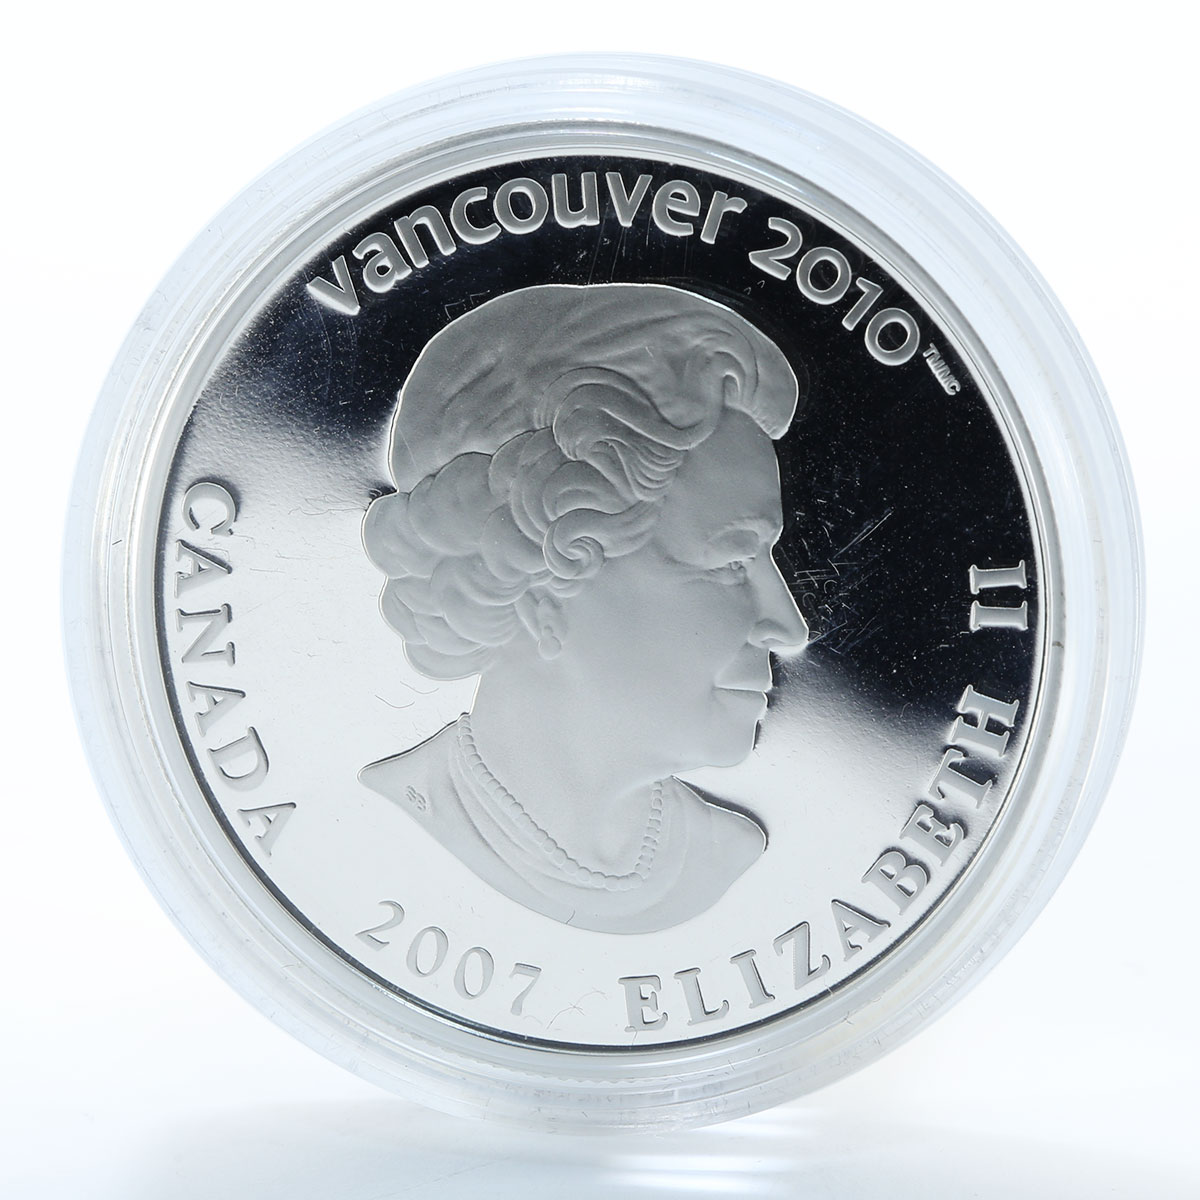 Canada 25 dollars Biathlon 2010 Winter Olympics Vancouver silver proof coin 2007